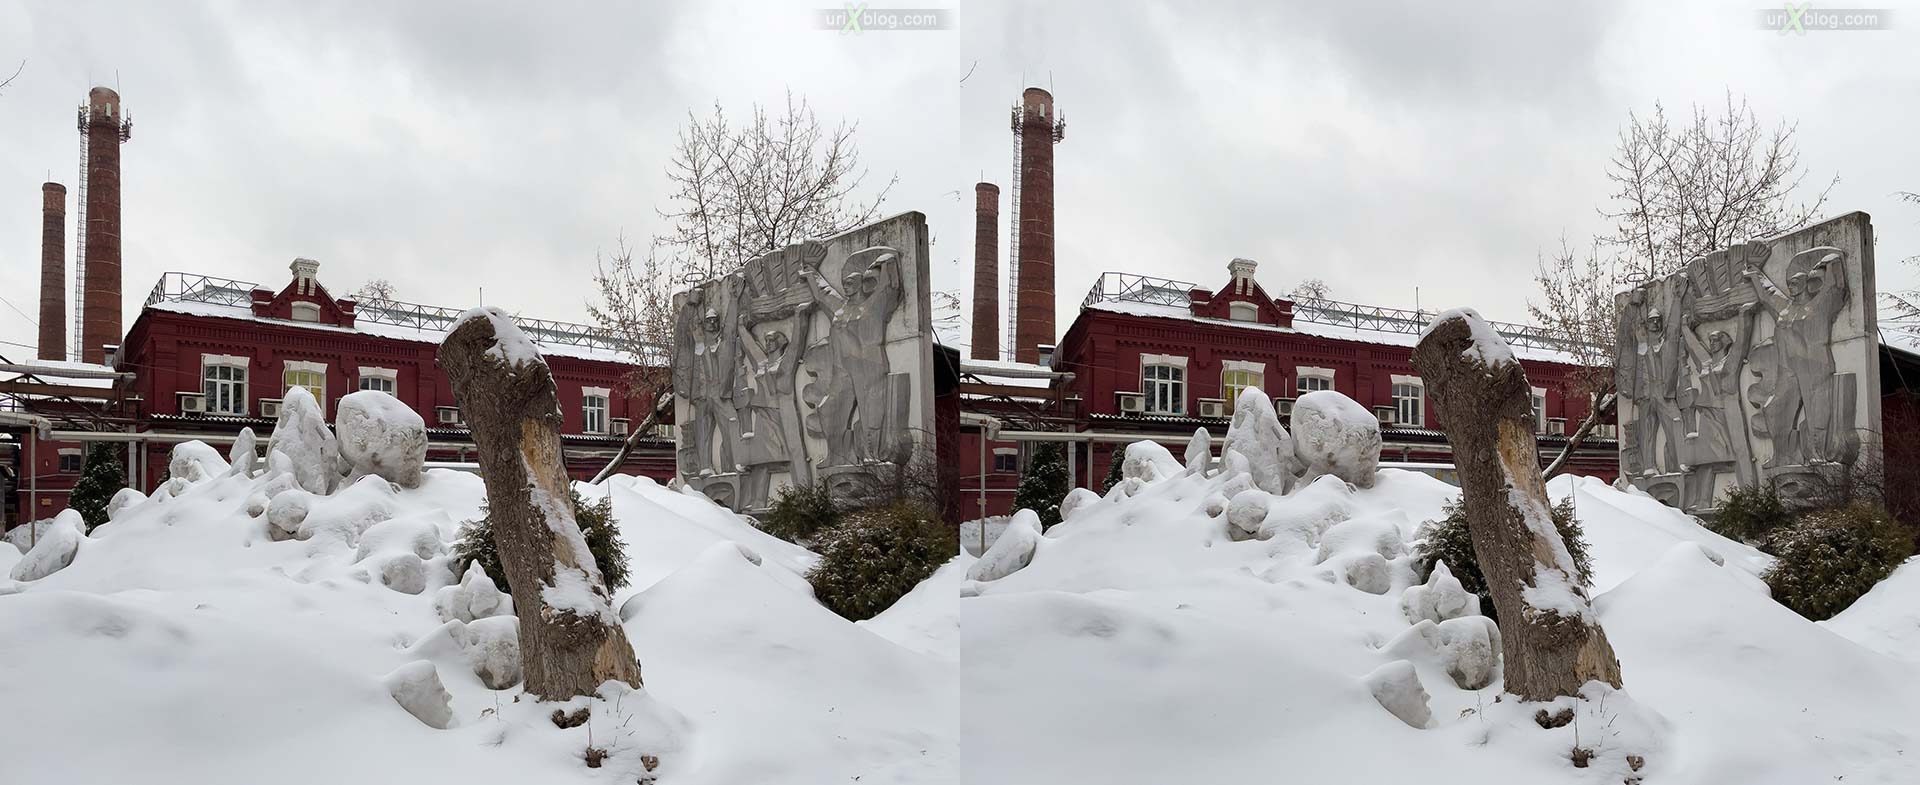 Crystal factory, Moscow, Russia, 3D, stereo pair, cross-eyed, crossview, cross view stereo pair, stereoscopic